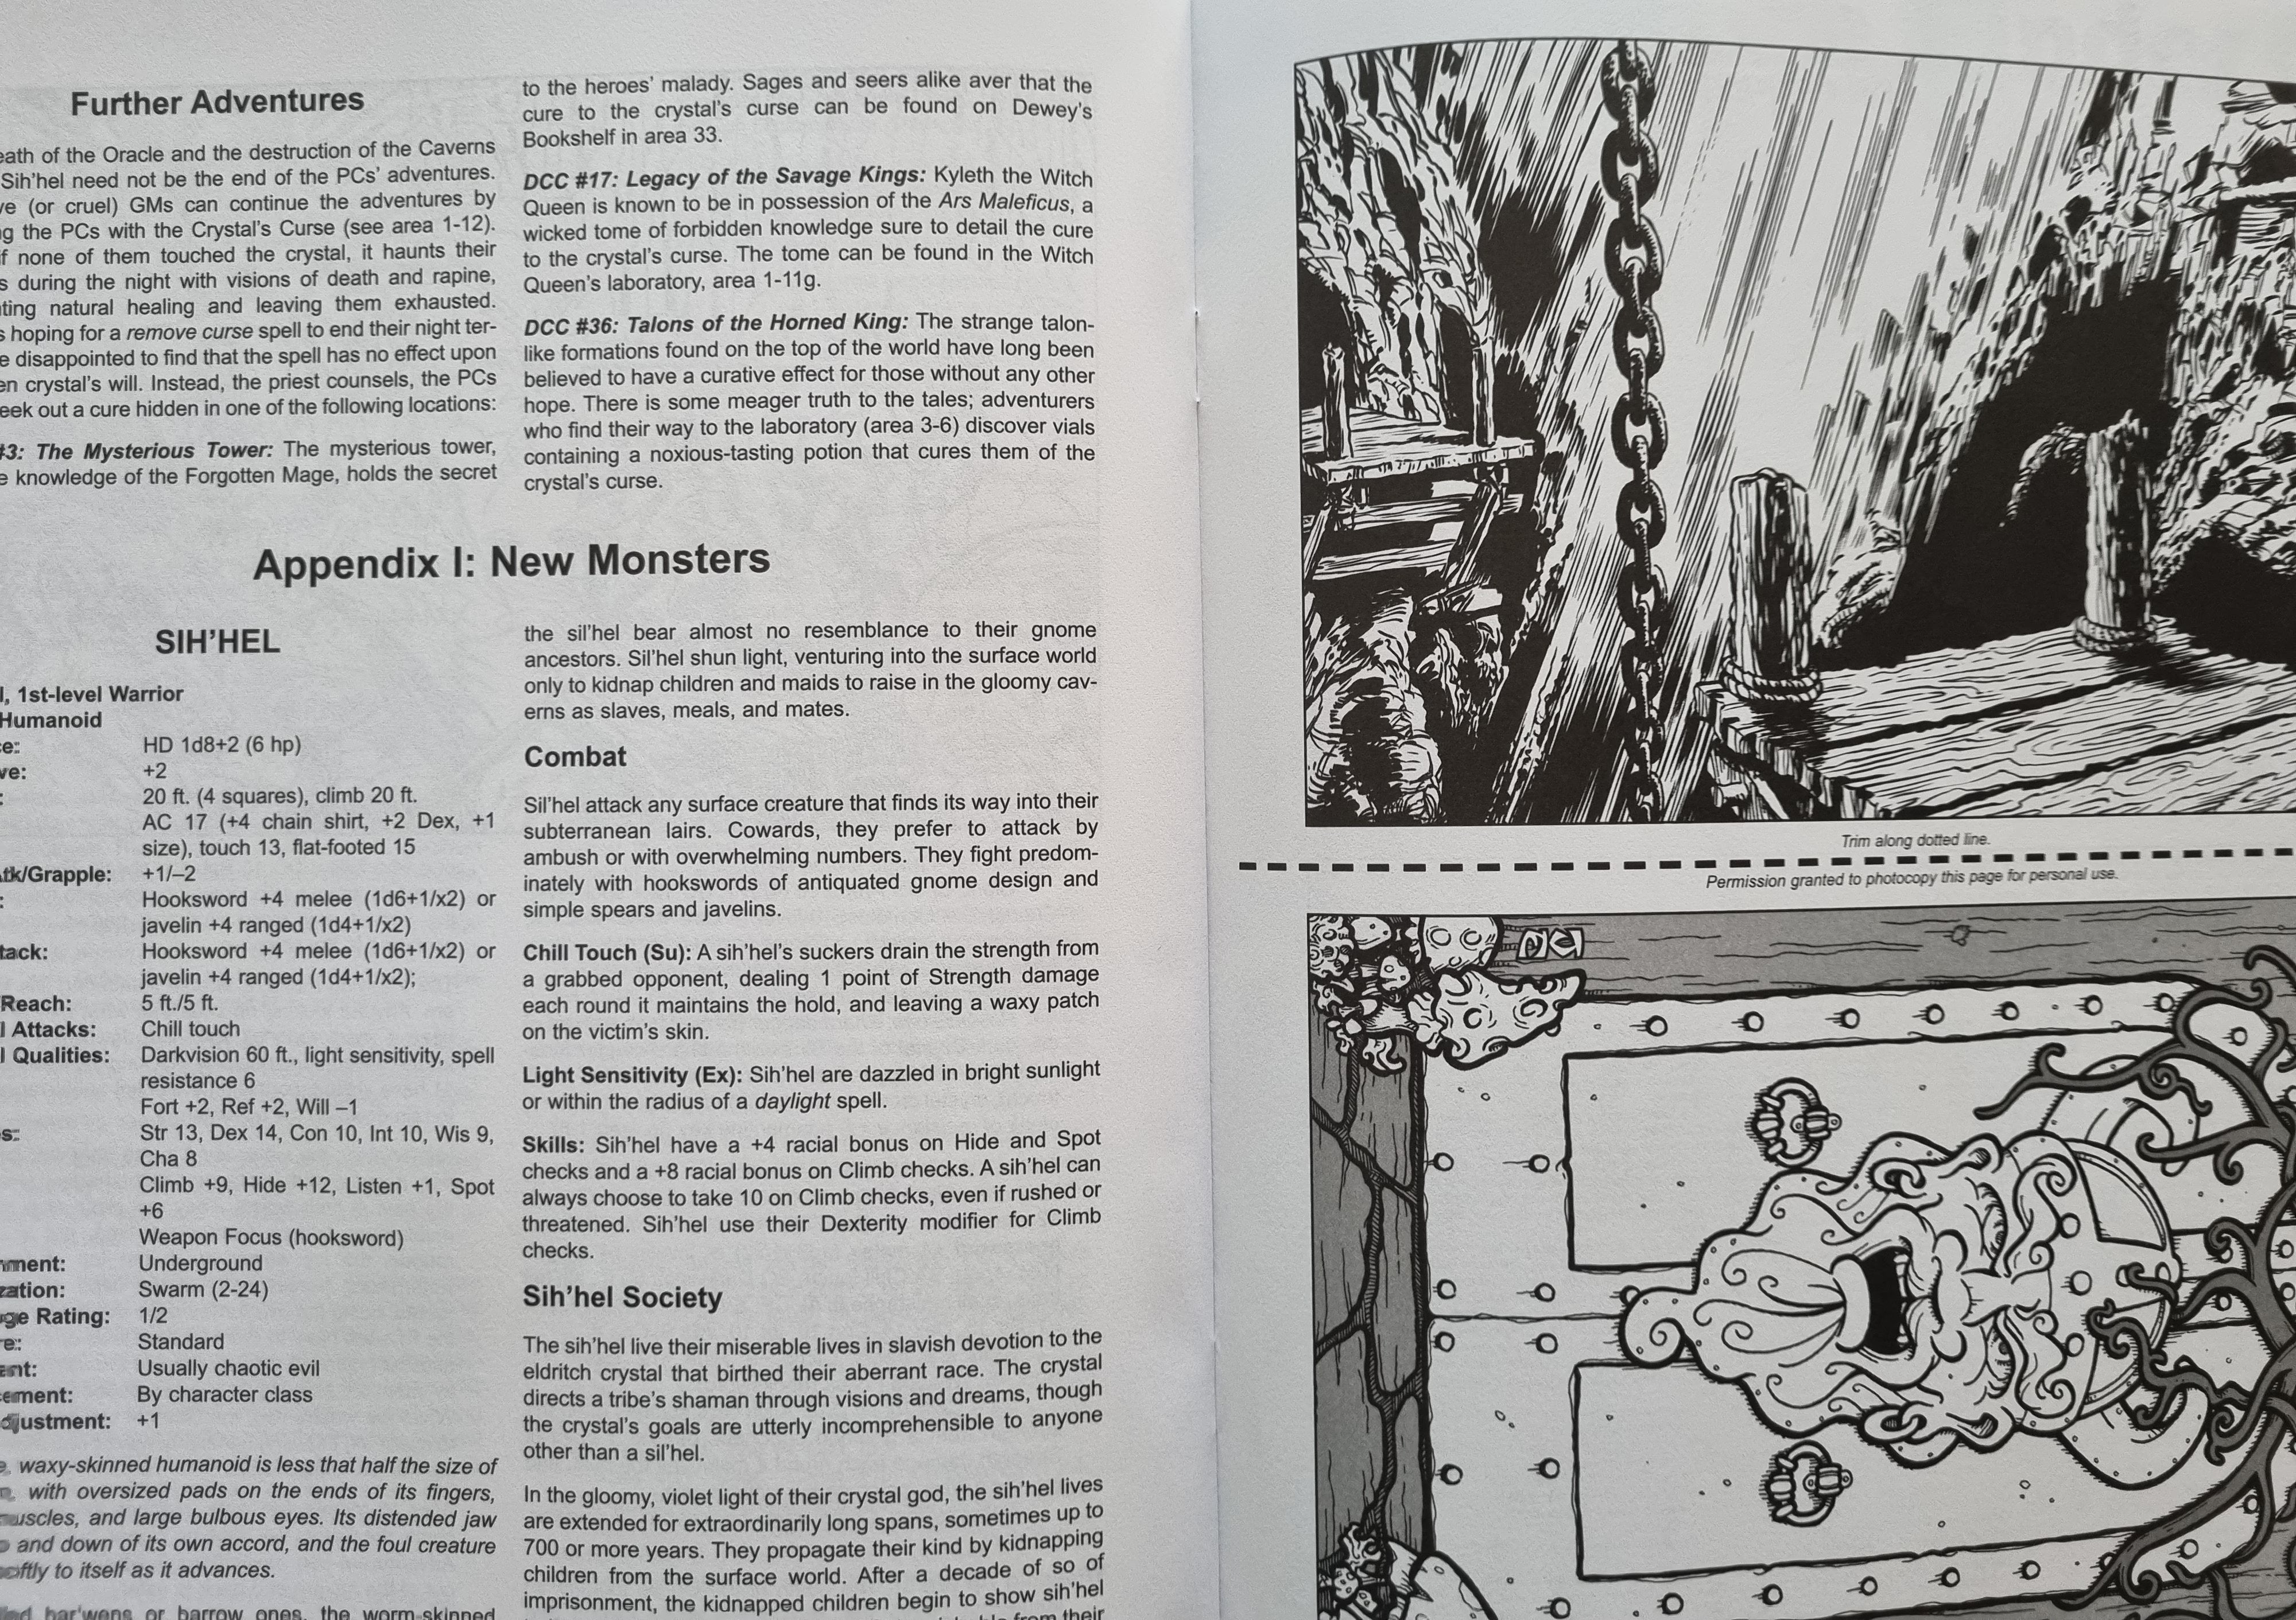 The Sinister Secret of Whiterock - Dungeon Crawl Classics (D20 System)